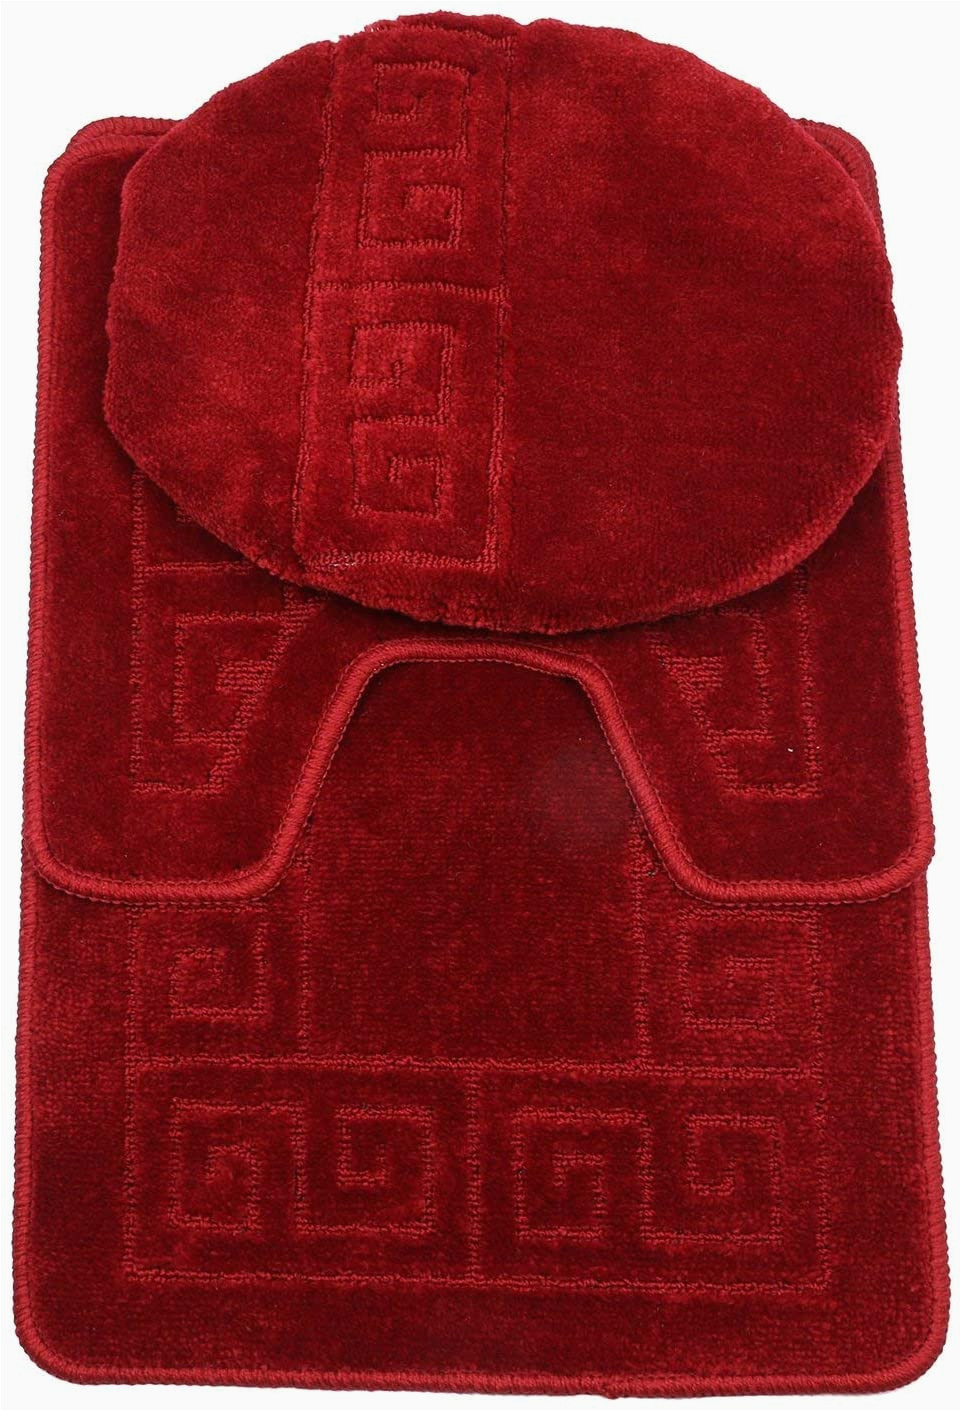 Wine Colored Bath Rugs 3 Piece Bath Rug Set Pattern Bathroom Rug 20×32 Large Contour Mat 20×20 with Lid Cover Burgundy